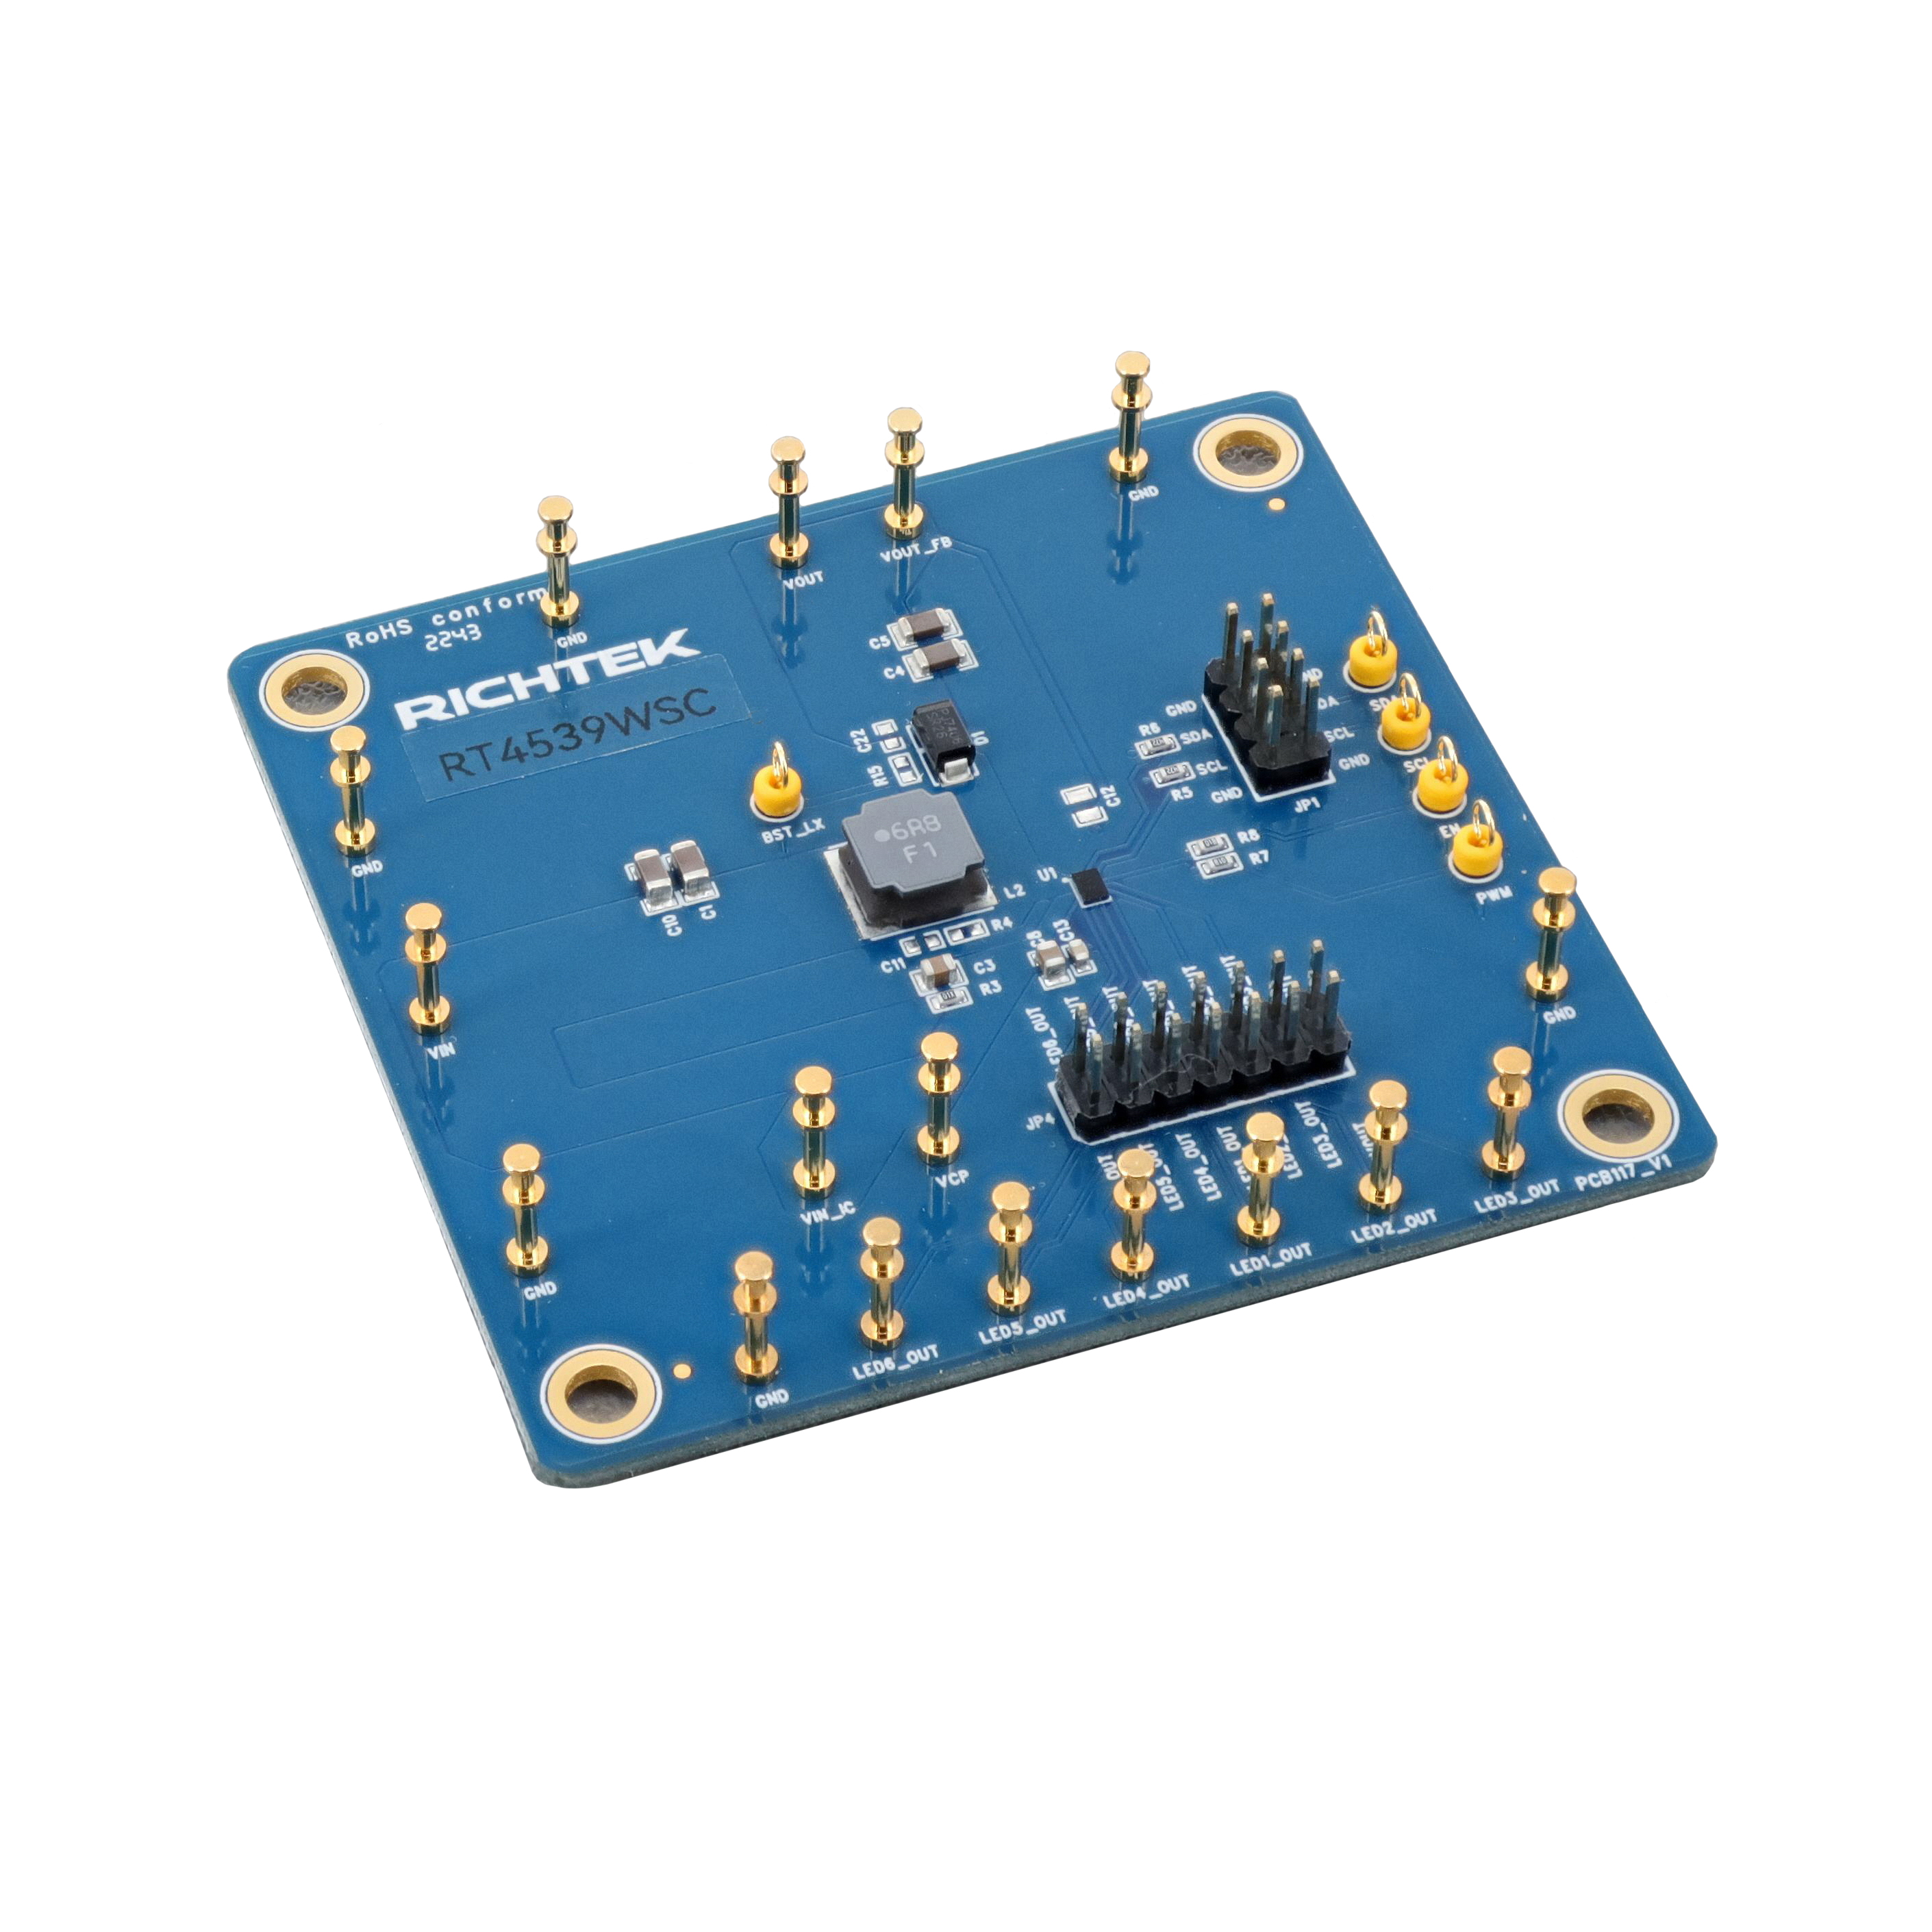 【EVB_RT4539WSC】EVALUATION BOARD FOR RT4539WSC